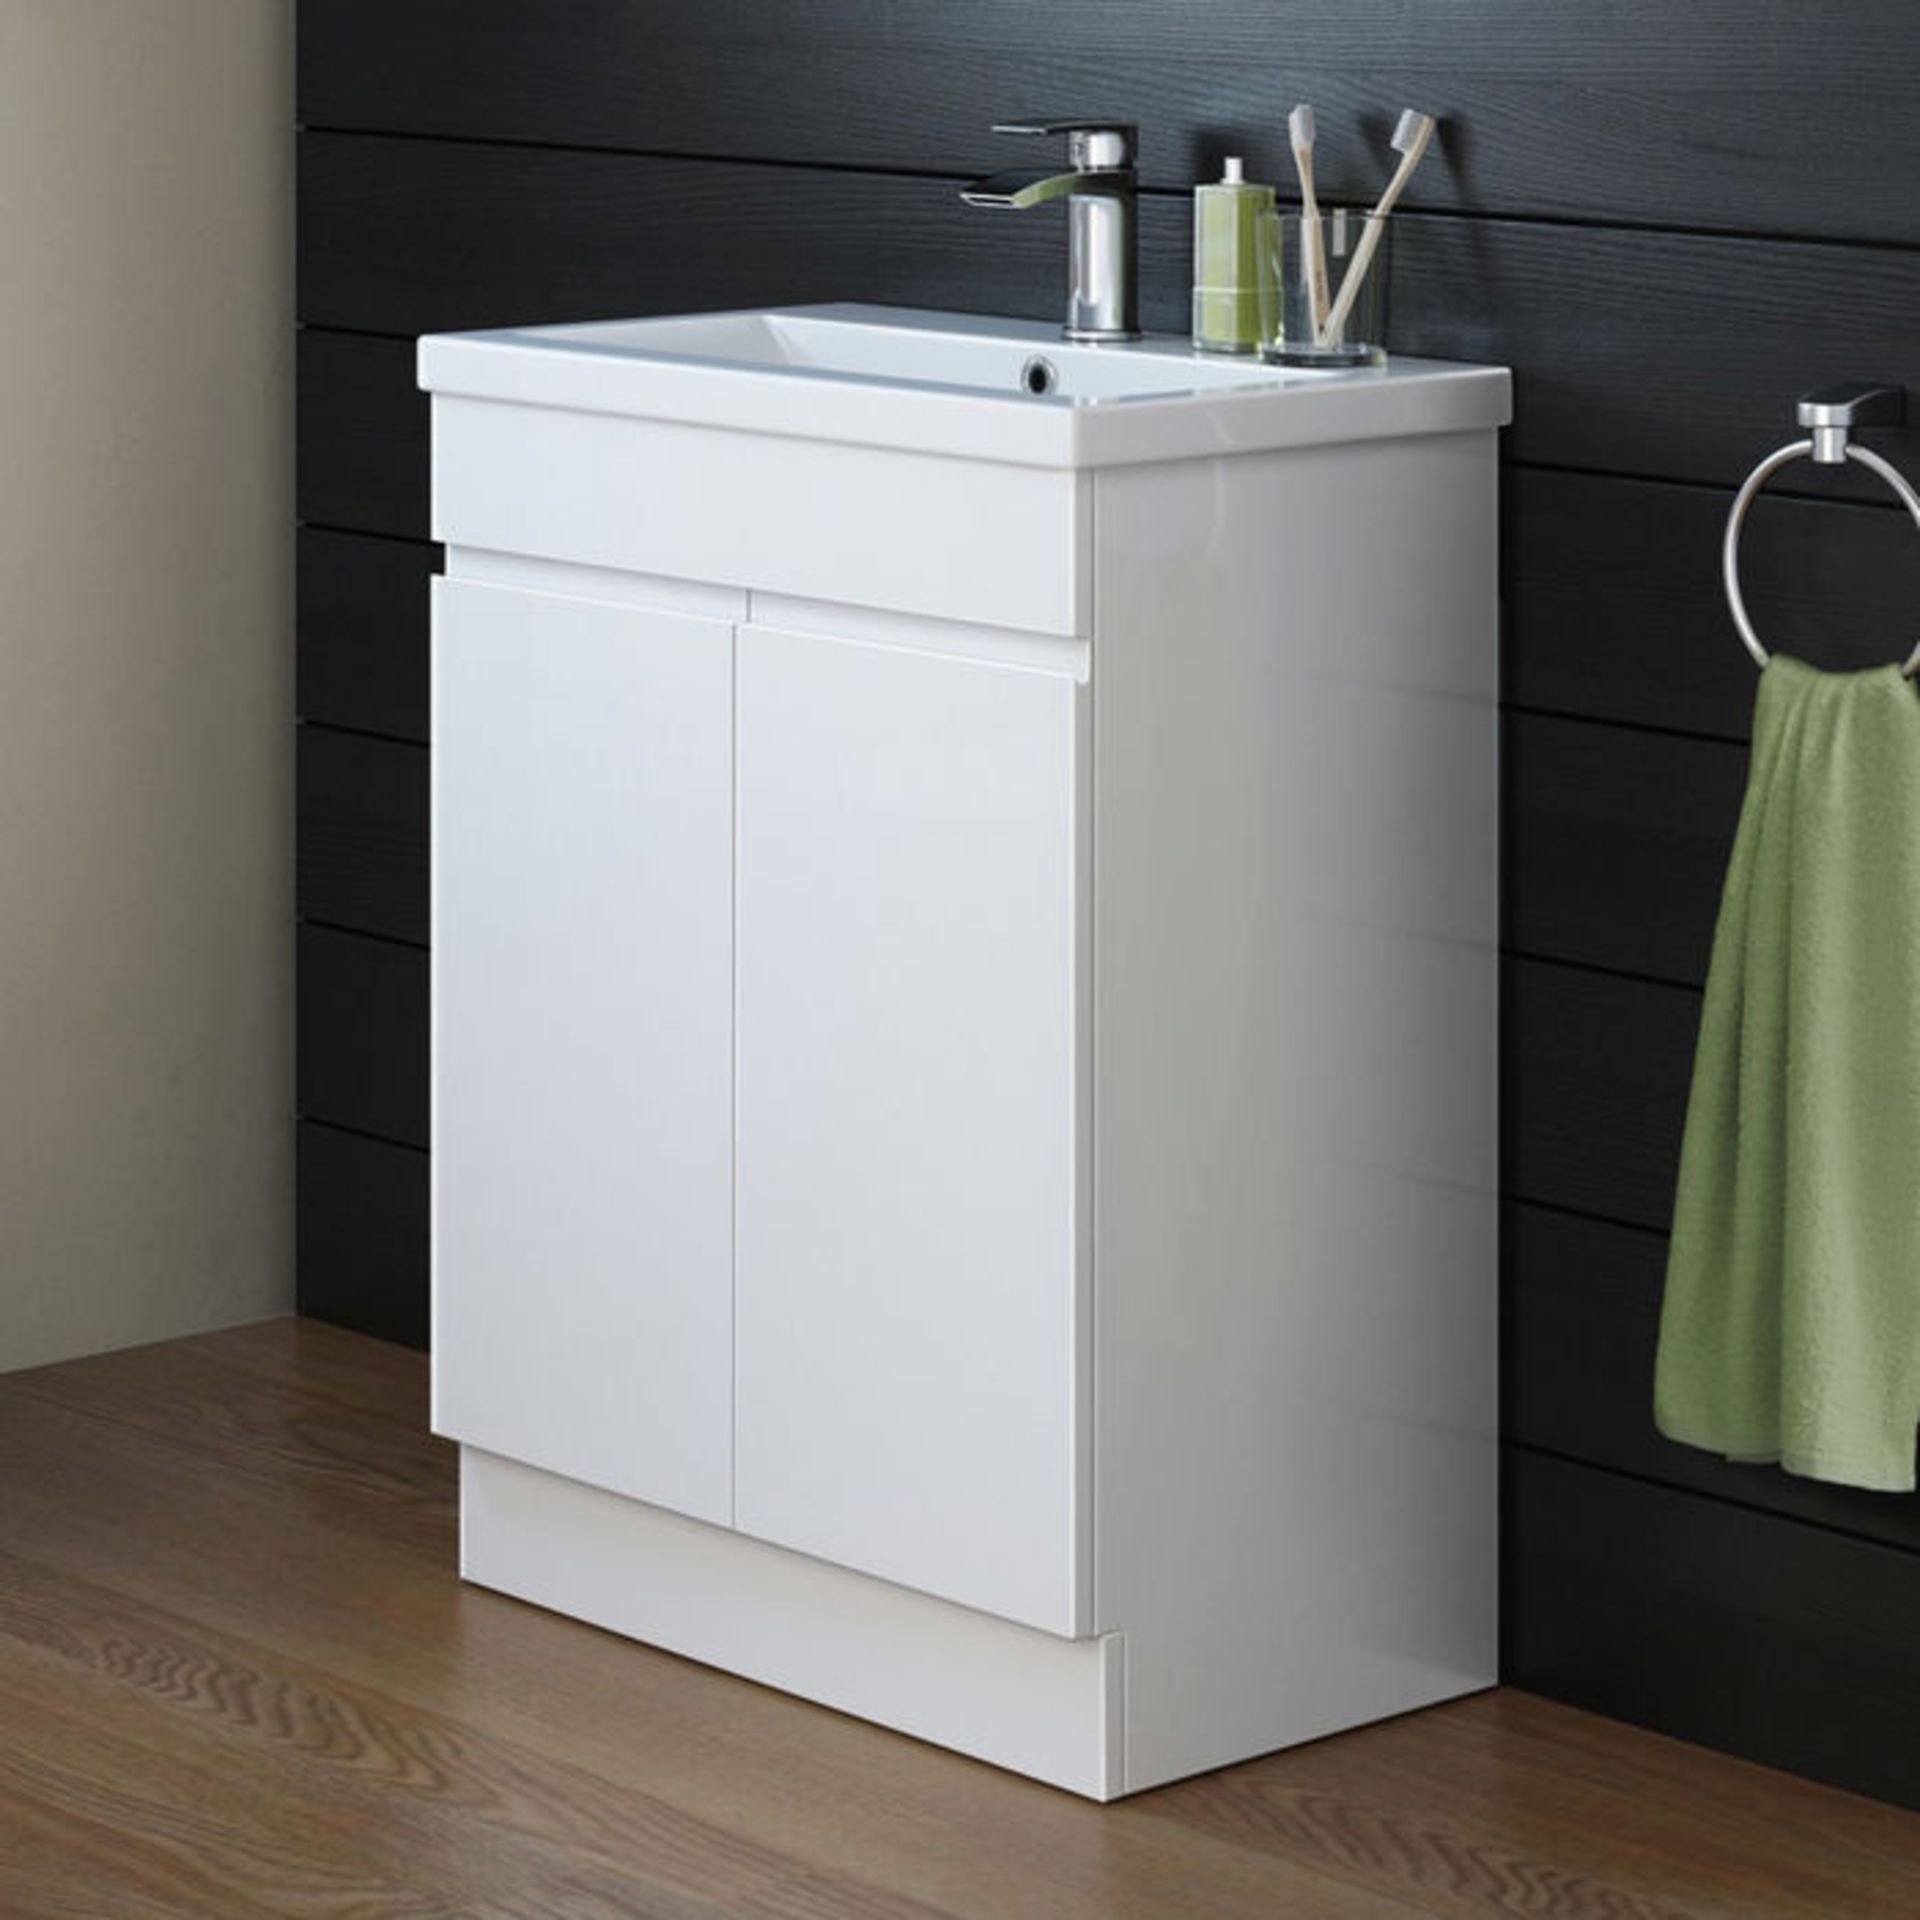 (PA60) 600mm Trent High Gloss White Basin Cabinet - Floor Standing. RRP £499.99. COMES COMPLETE WITH